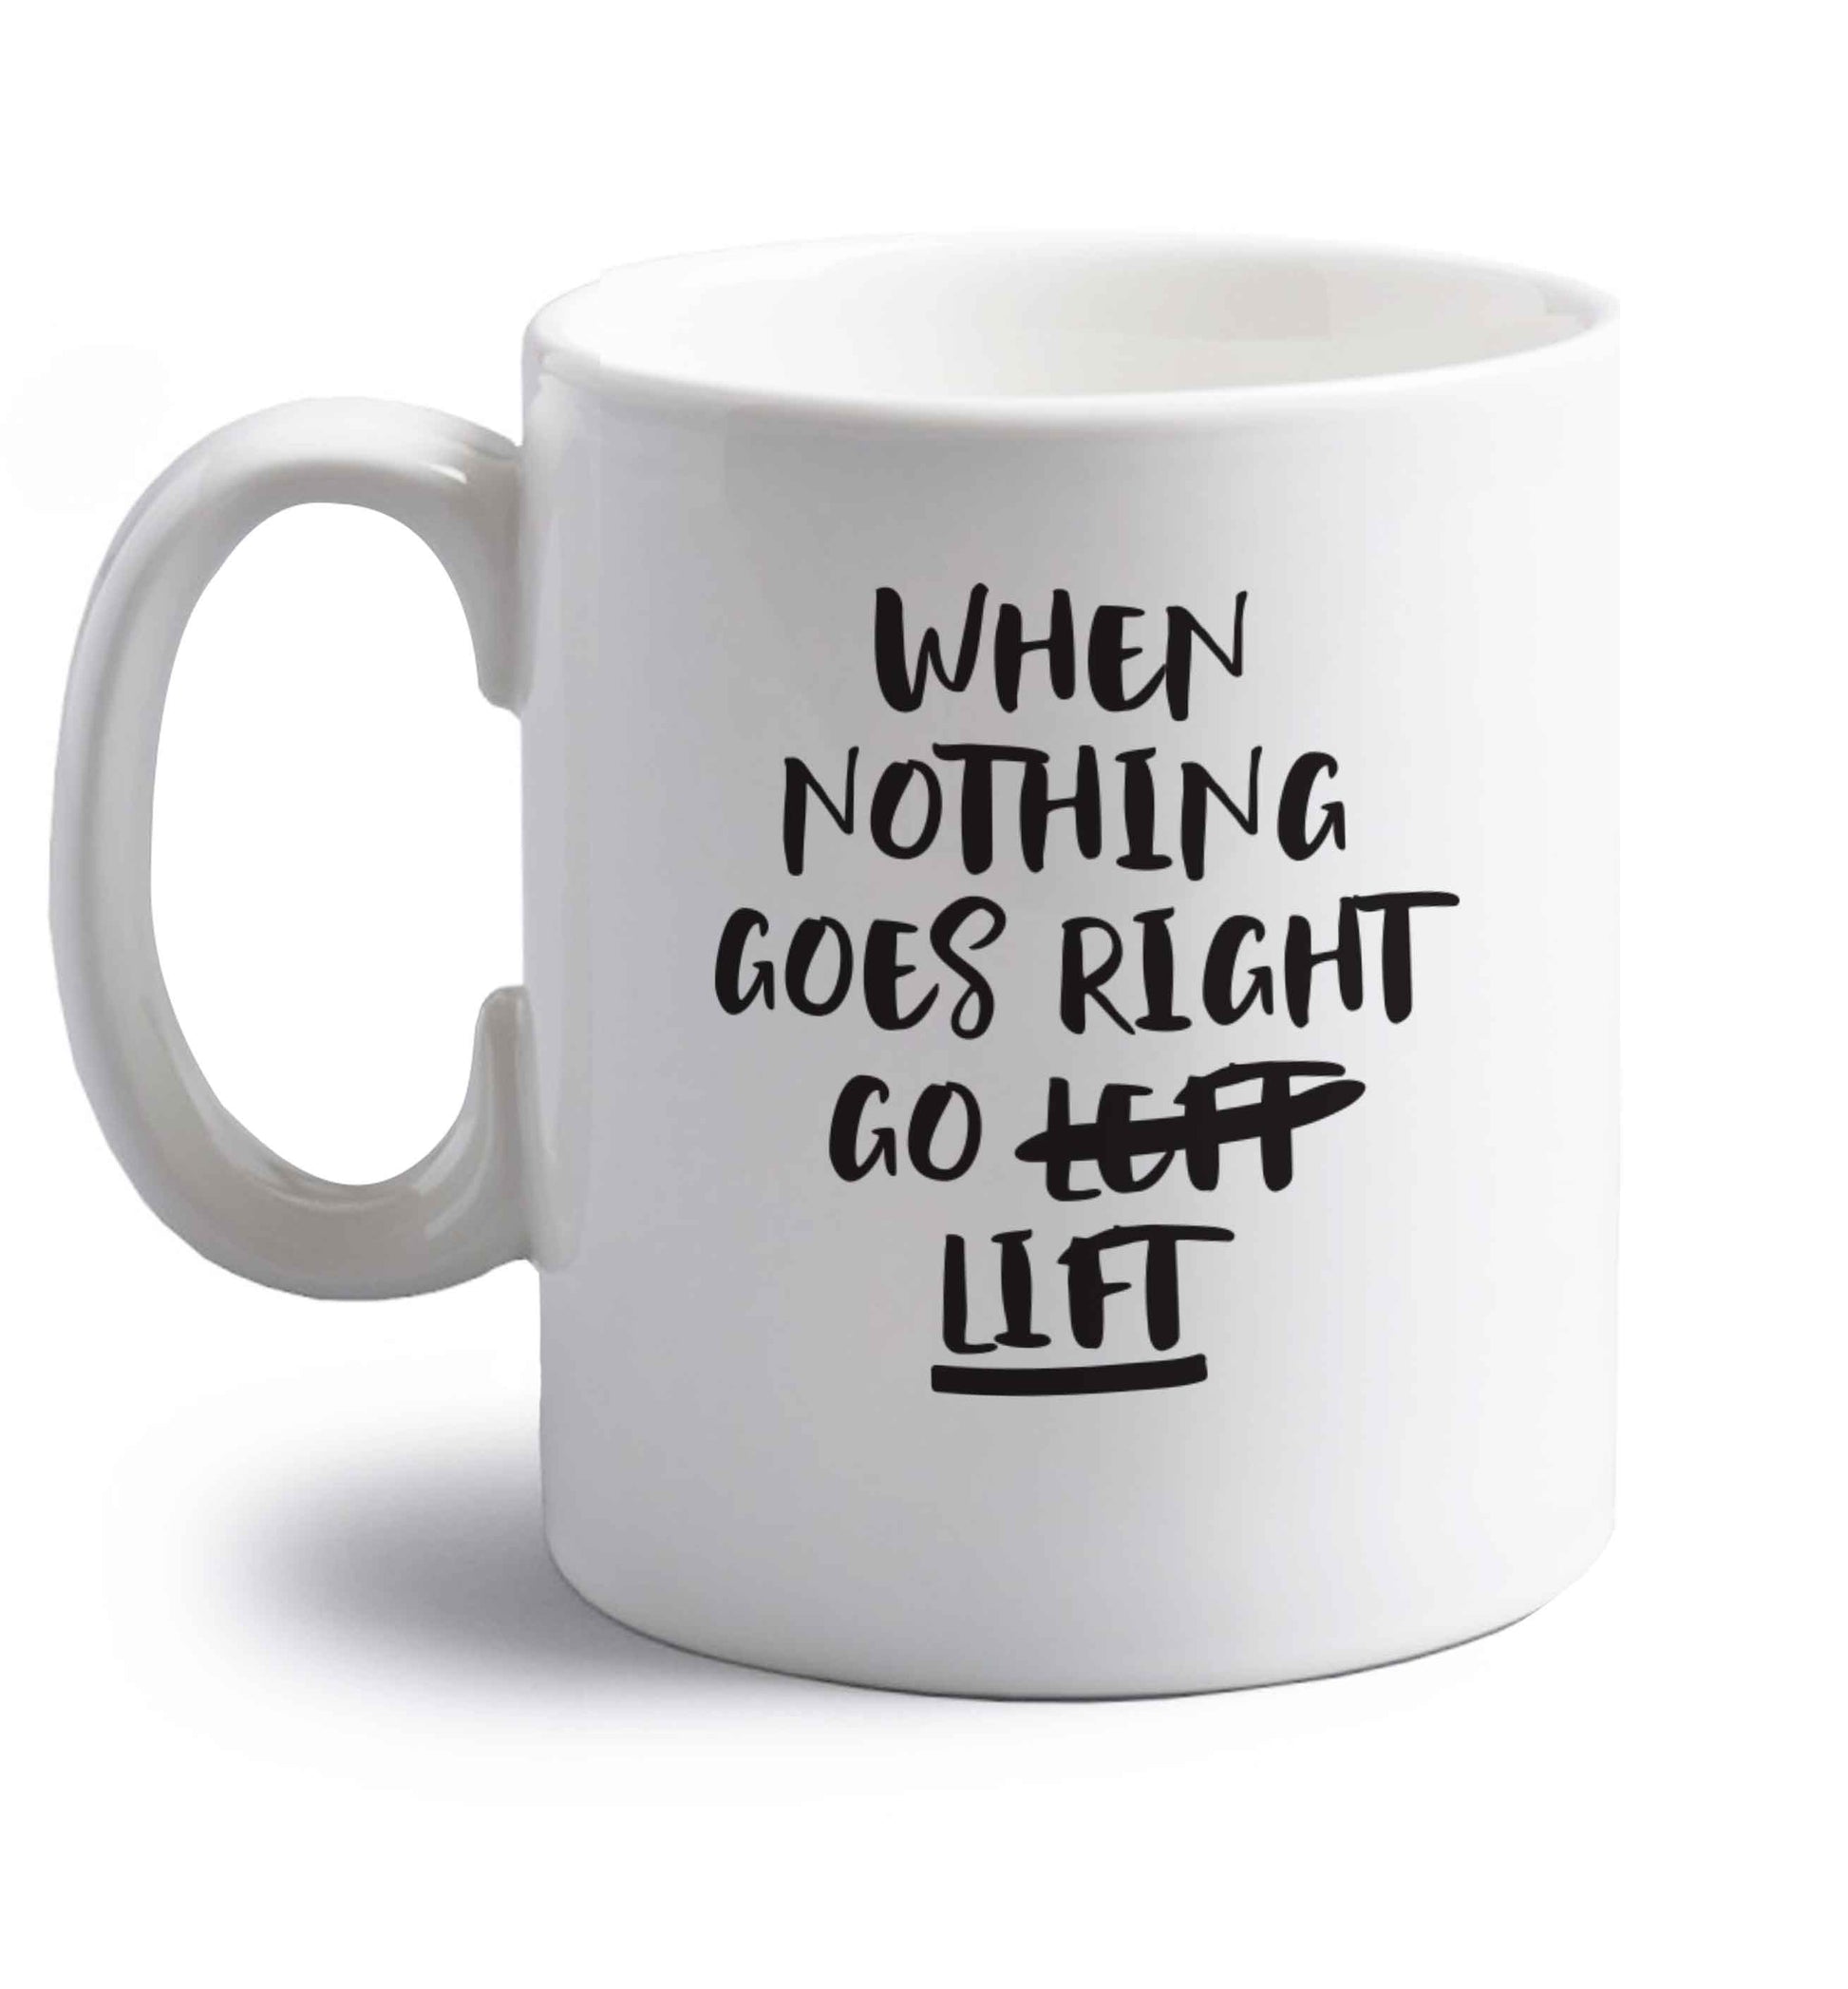 When nothing goes right go lift right handed white ceramic mug 